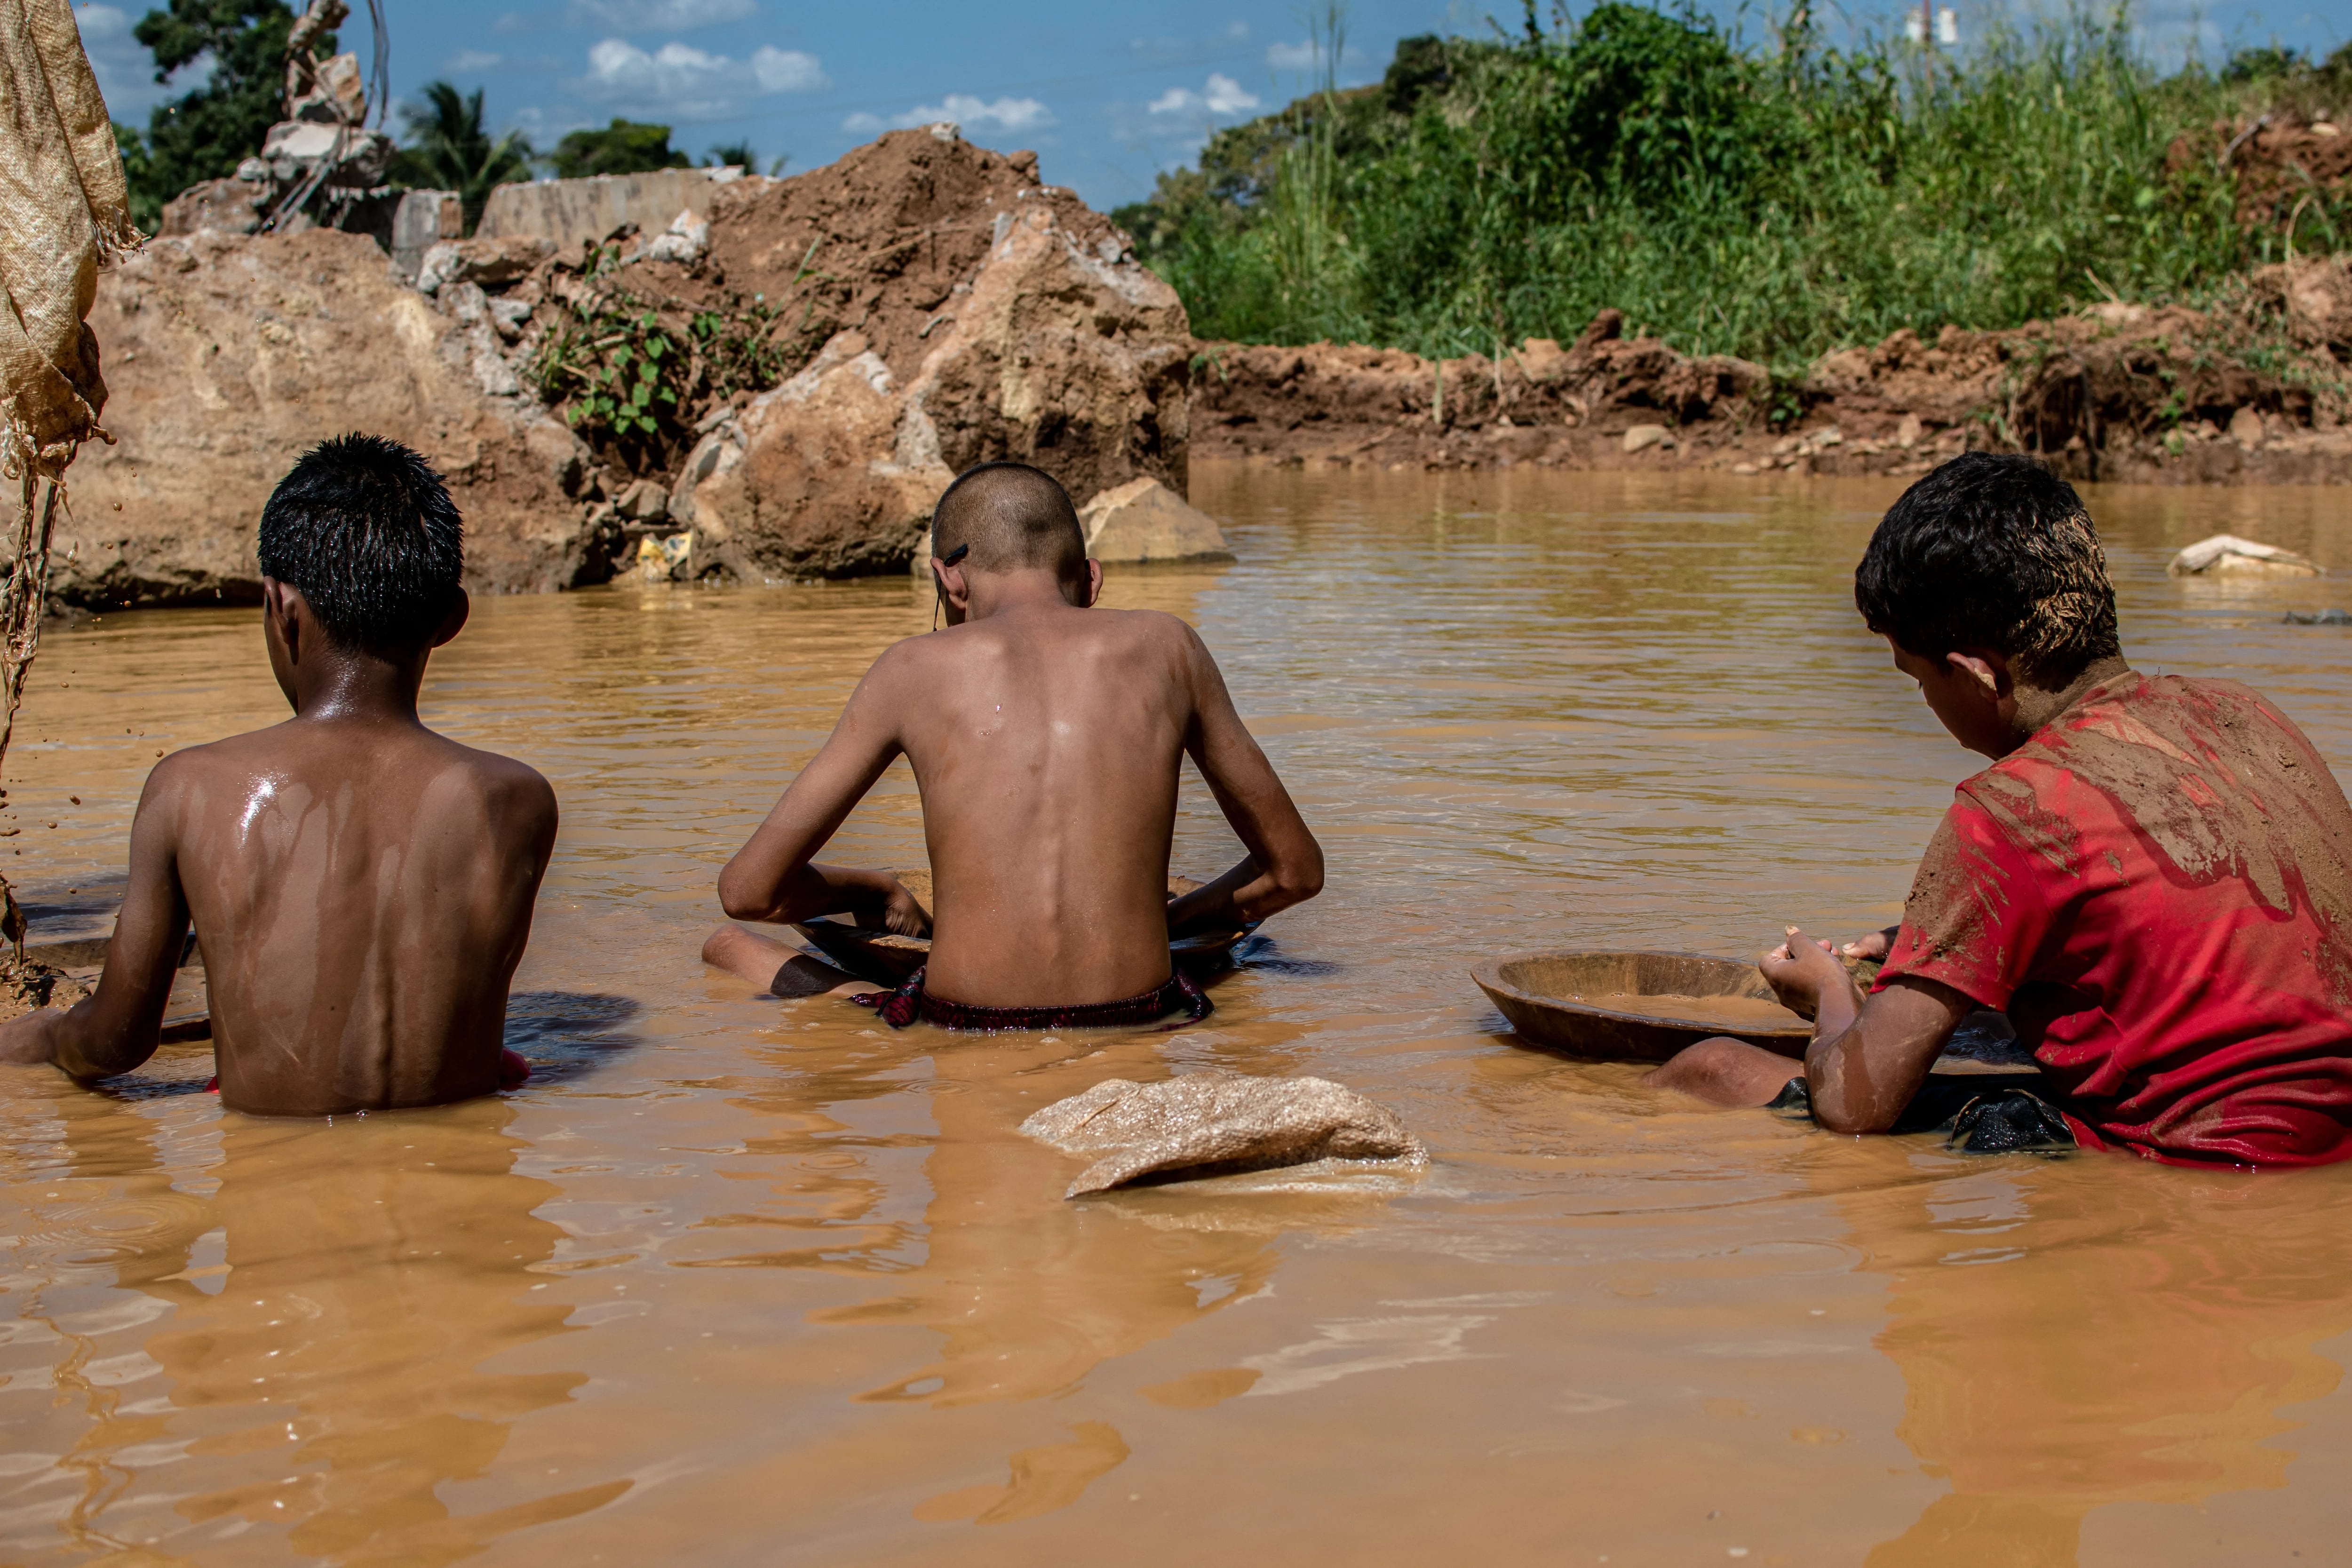 Venezuelan mining children work in a puddle of water and mud while searching for gold in an open pit mine in El Peru community, El Callao, Bolivar State, Venezuela, on September 2, 2023. In the town of El Callao, extracting gold from soil starts off as a kid's game, but soon becomes a full-time job that human rights activists says amounts to child exploitation. (Photo by Yris PAUL / AFP)